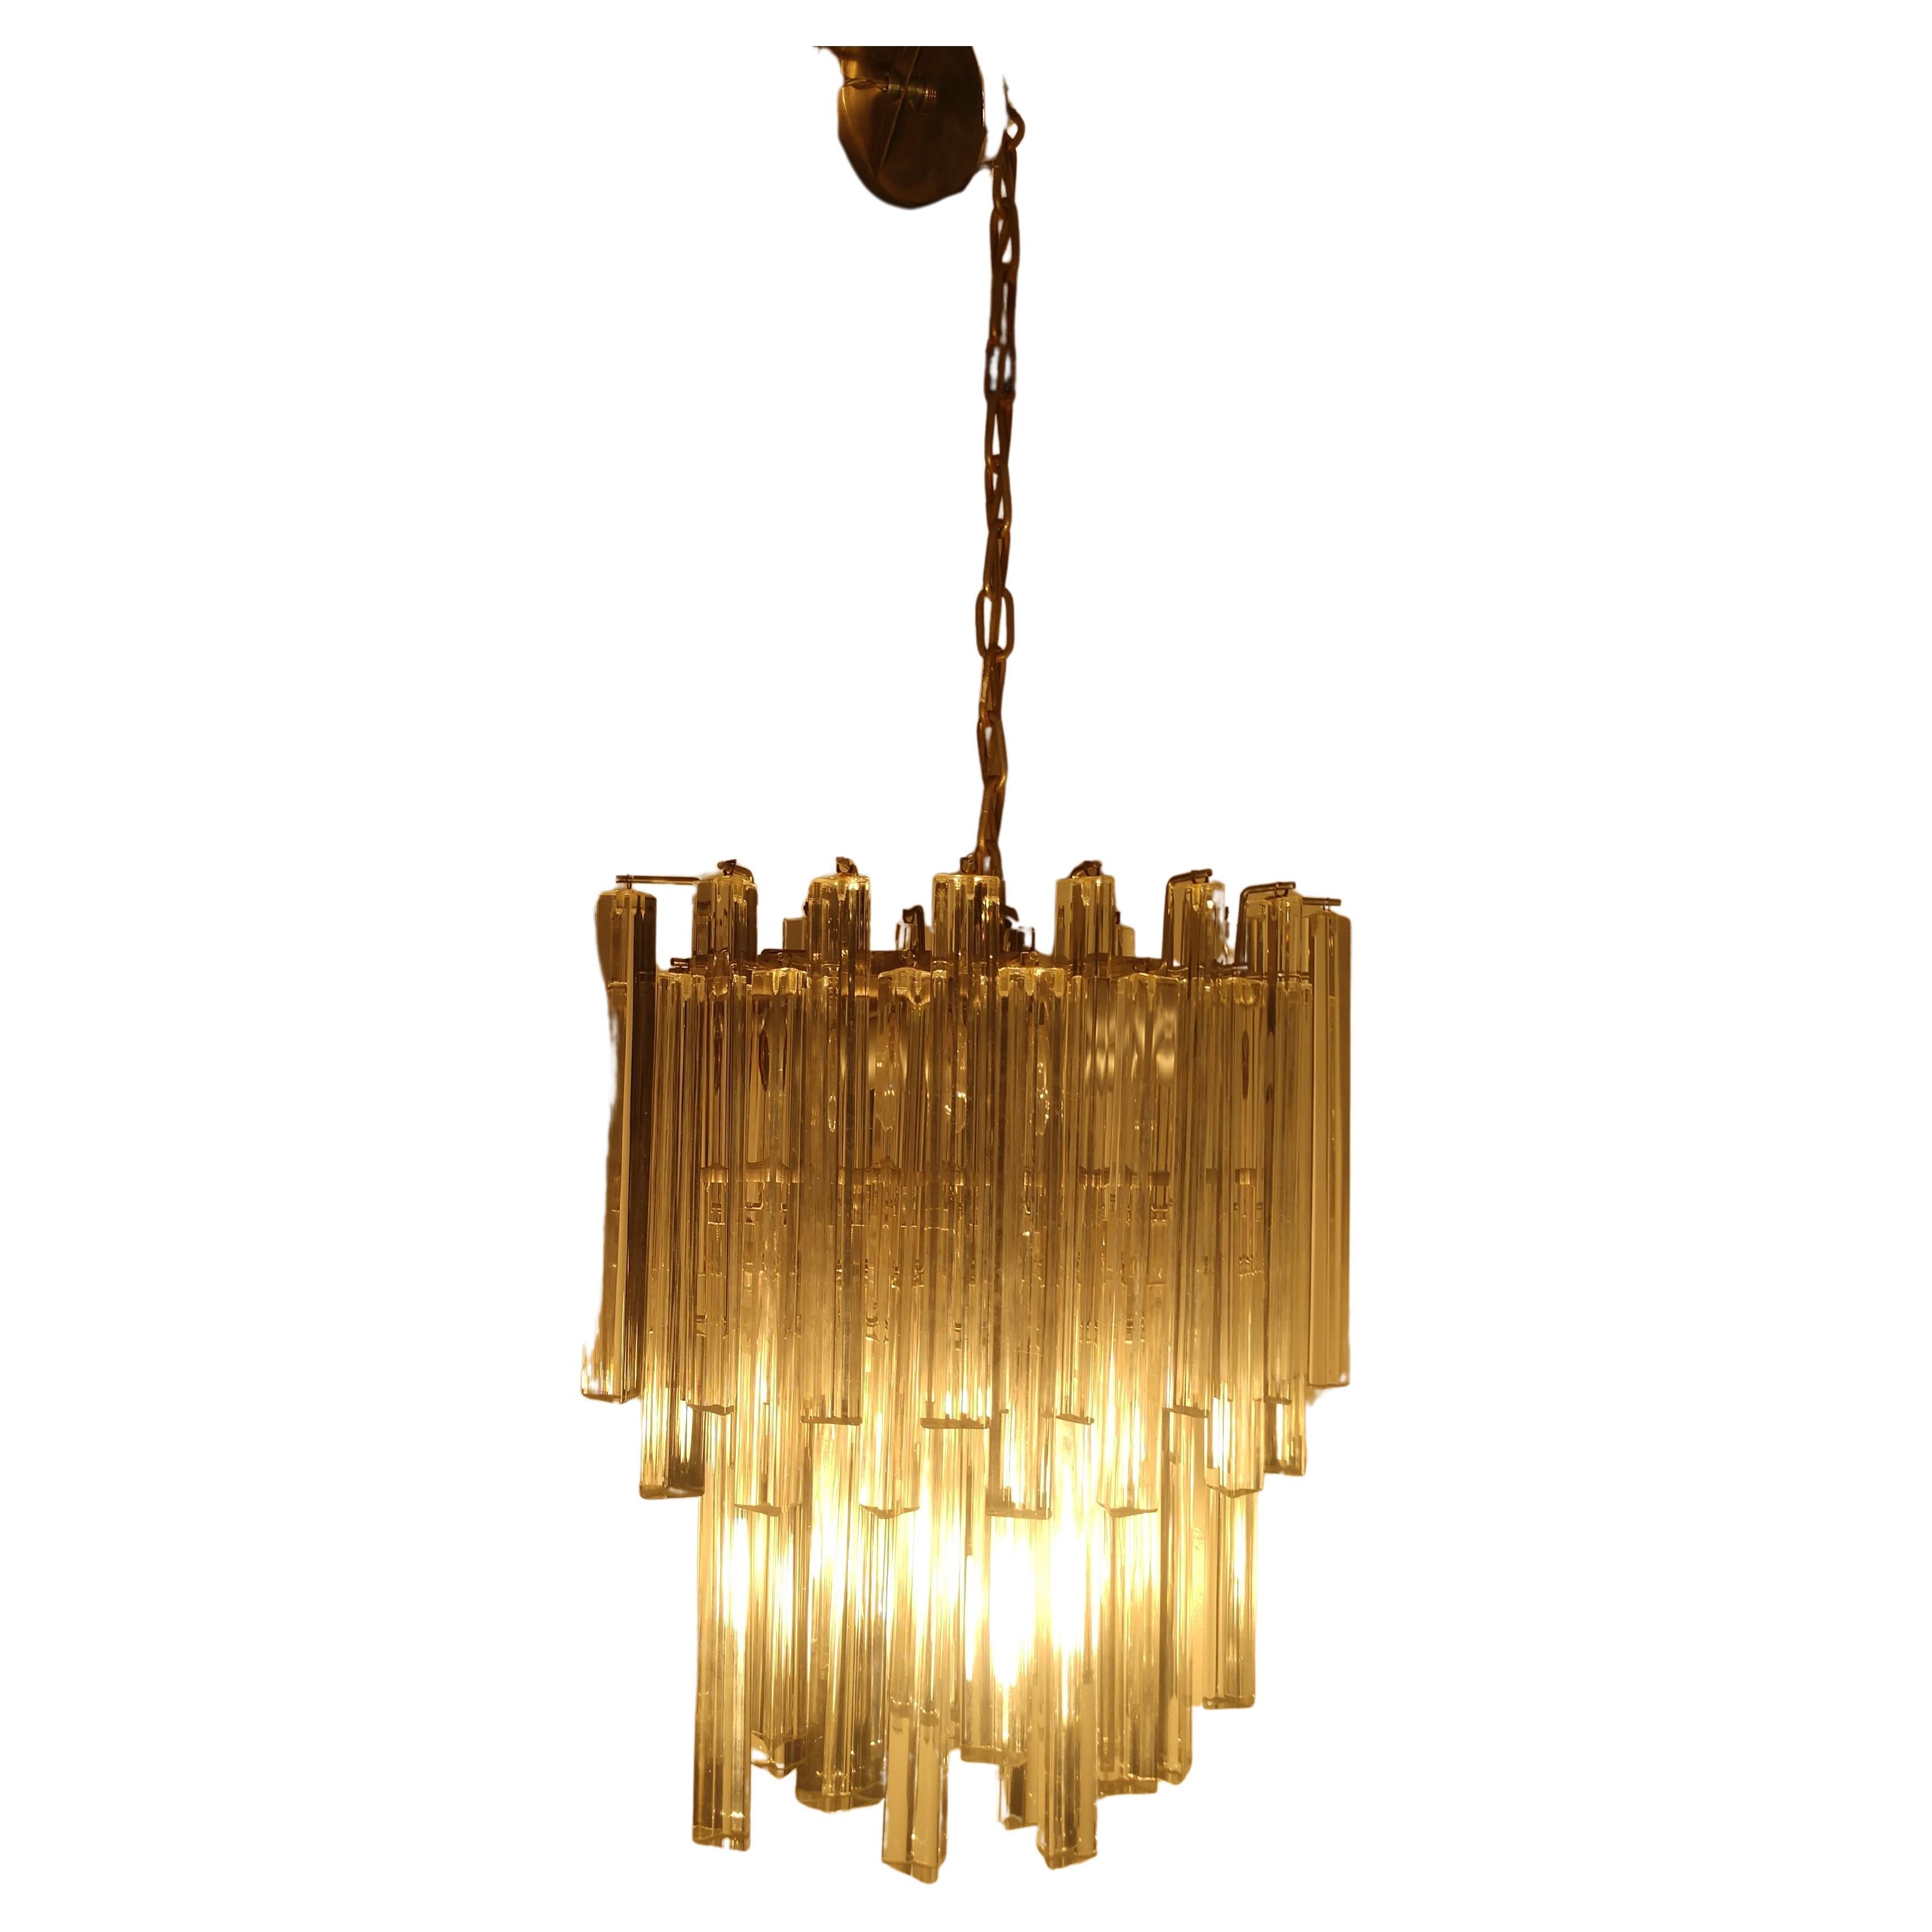 Hand-Crafted Mid Century Modern Venini Murano Glass Prism Chandelier For Sale